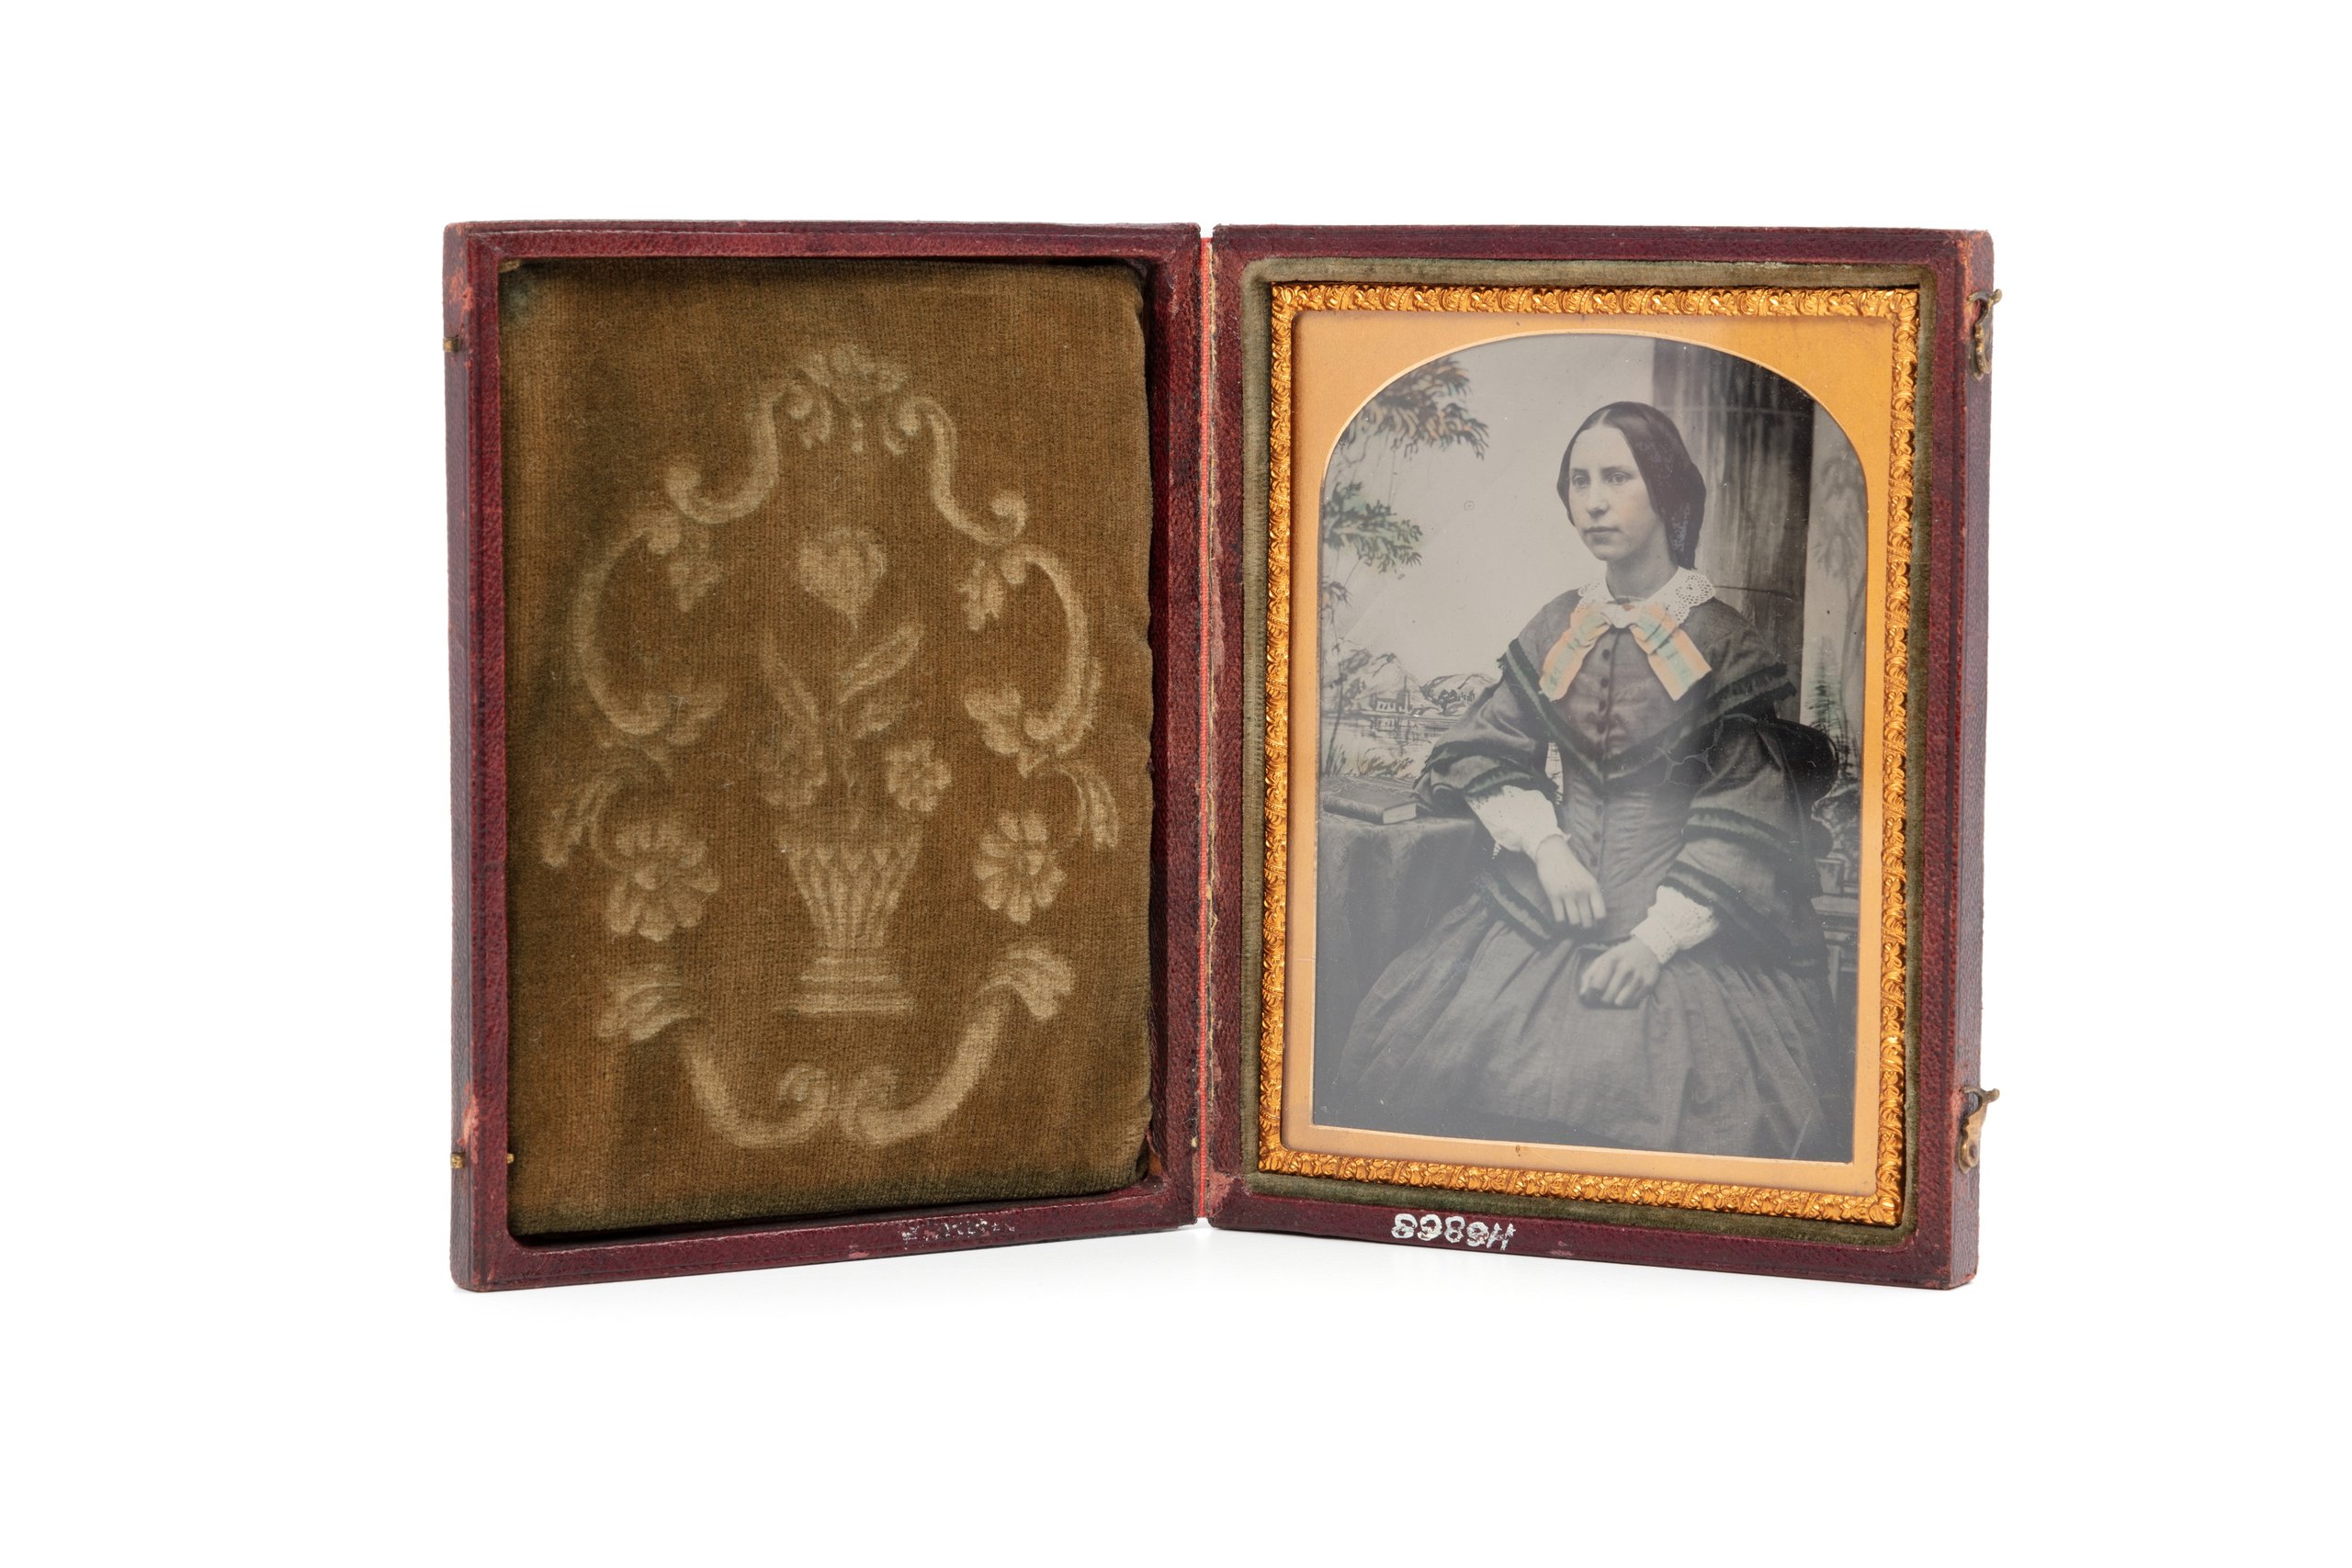 Hand-tinted ambrotype of a seated woman